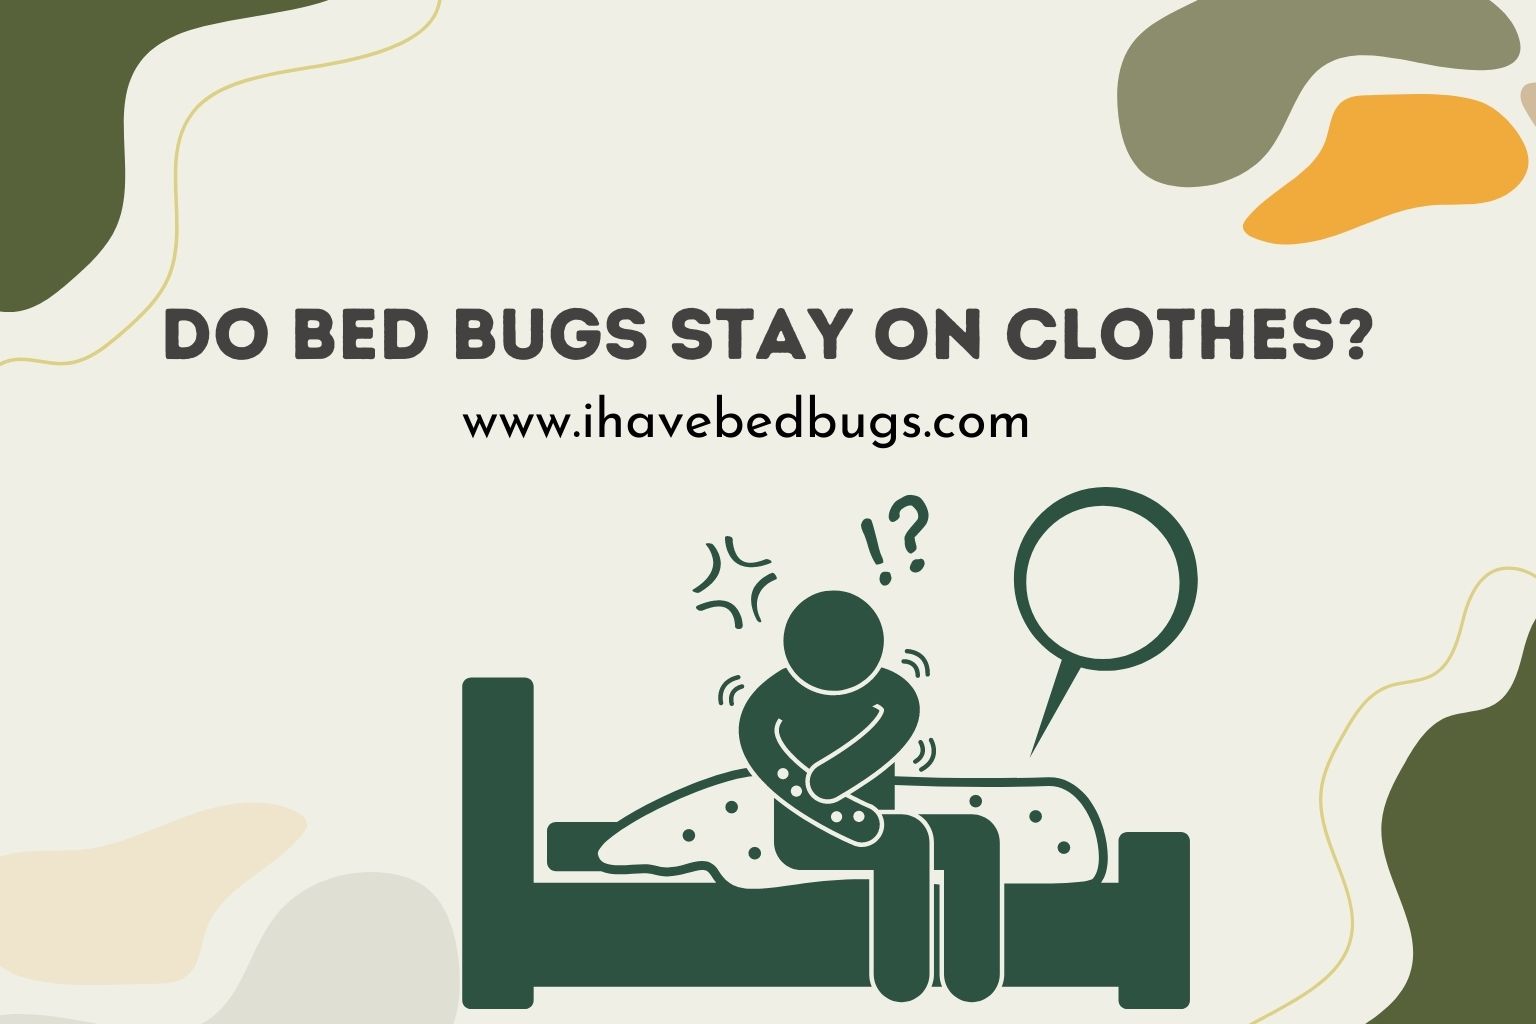 Do bed bugs stay on clothes